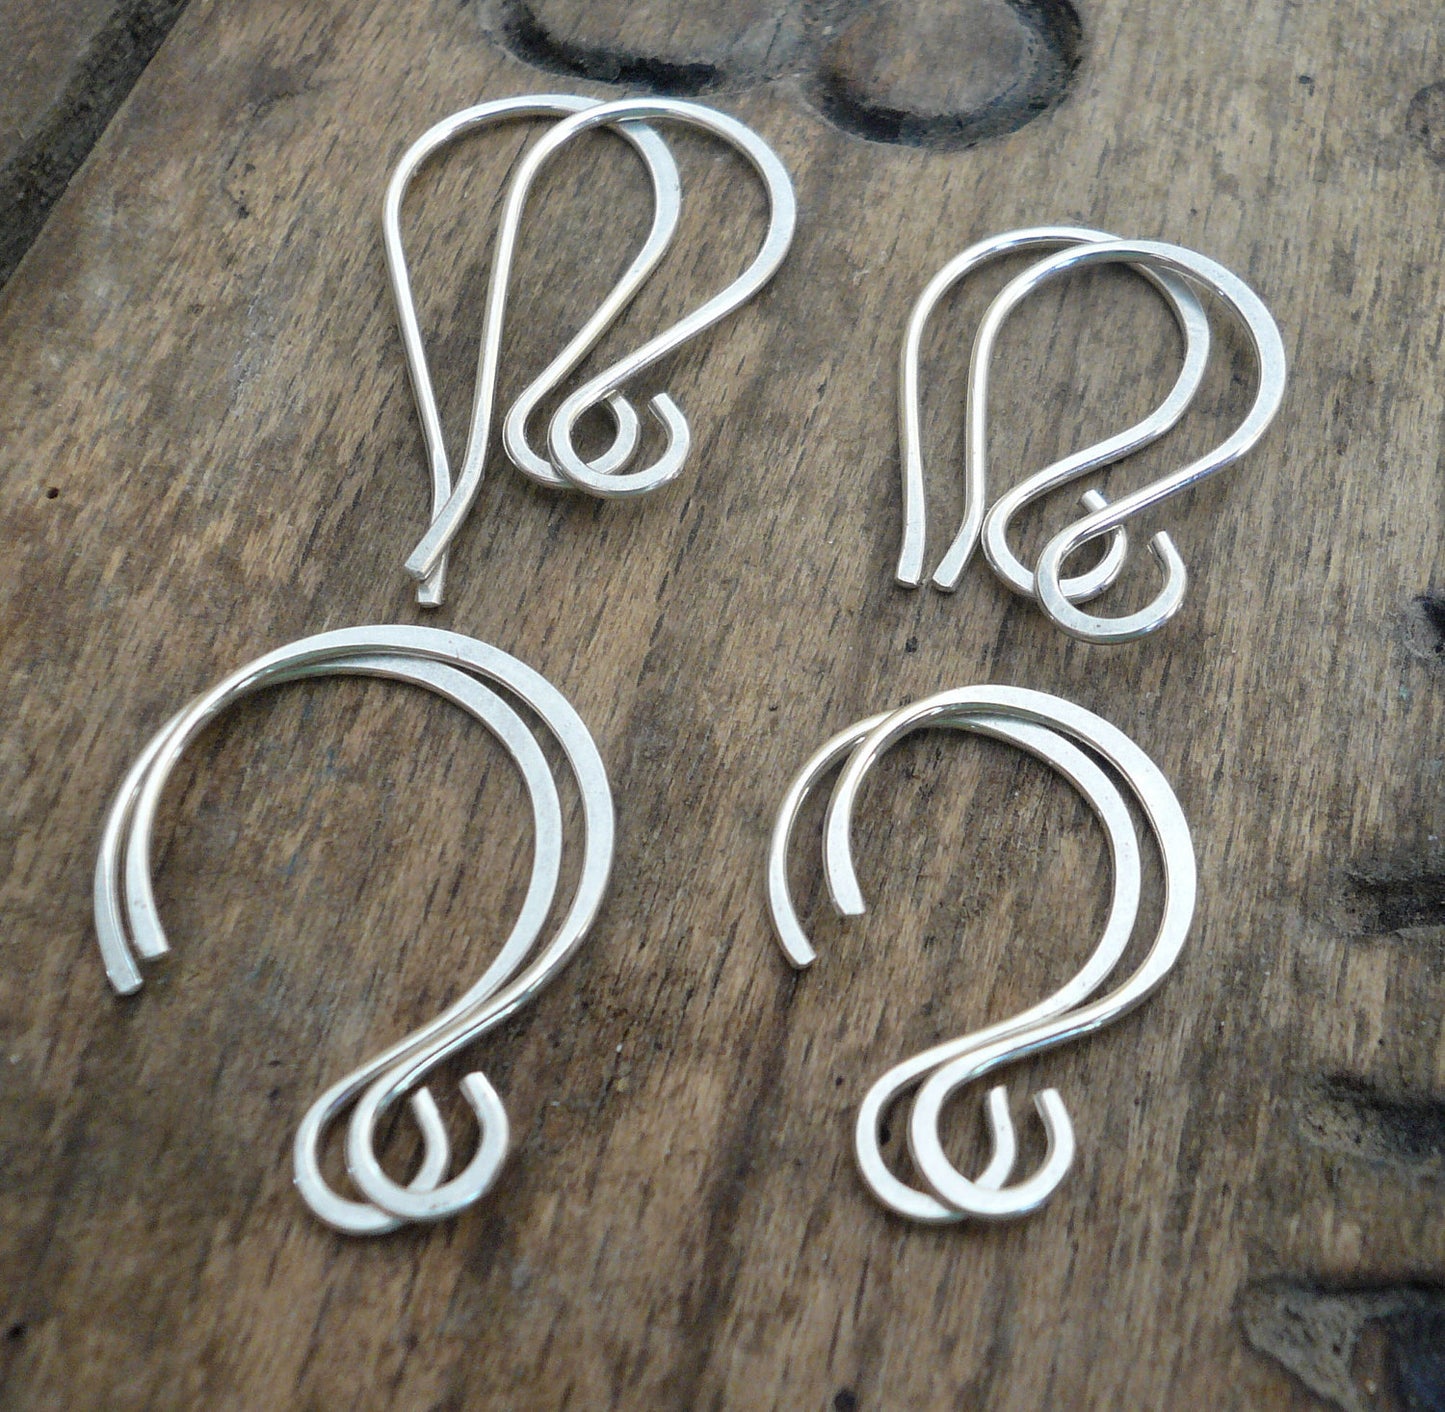 Sample Pack 4 pairs of my Sterling Silver Earwires - Handmade. Handforged. Shiny Finish. Made to Order